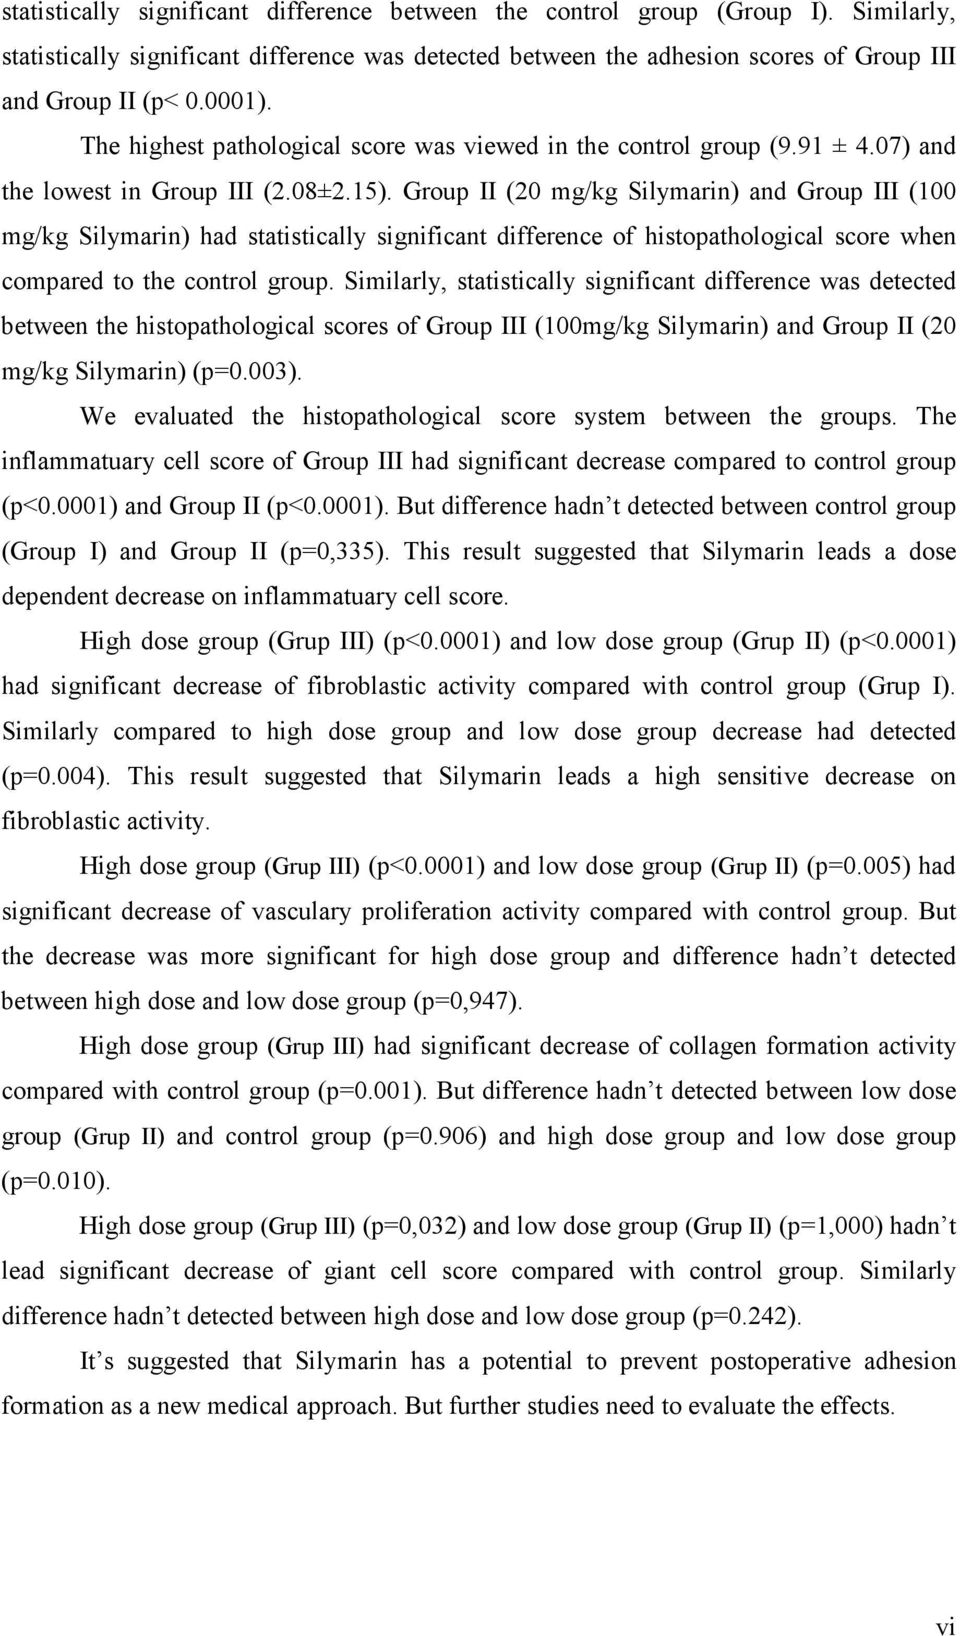 Group II (20 mg/kg Silymarin) and Group III (100 mg/kg Silymarin) had statistically significant difference of histopathological score when compared to the control group.